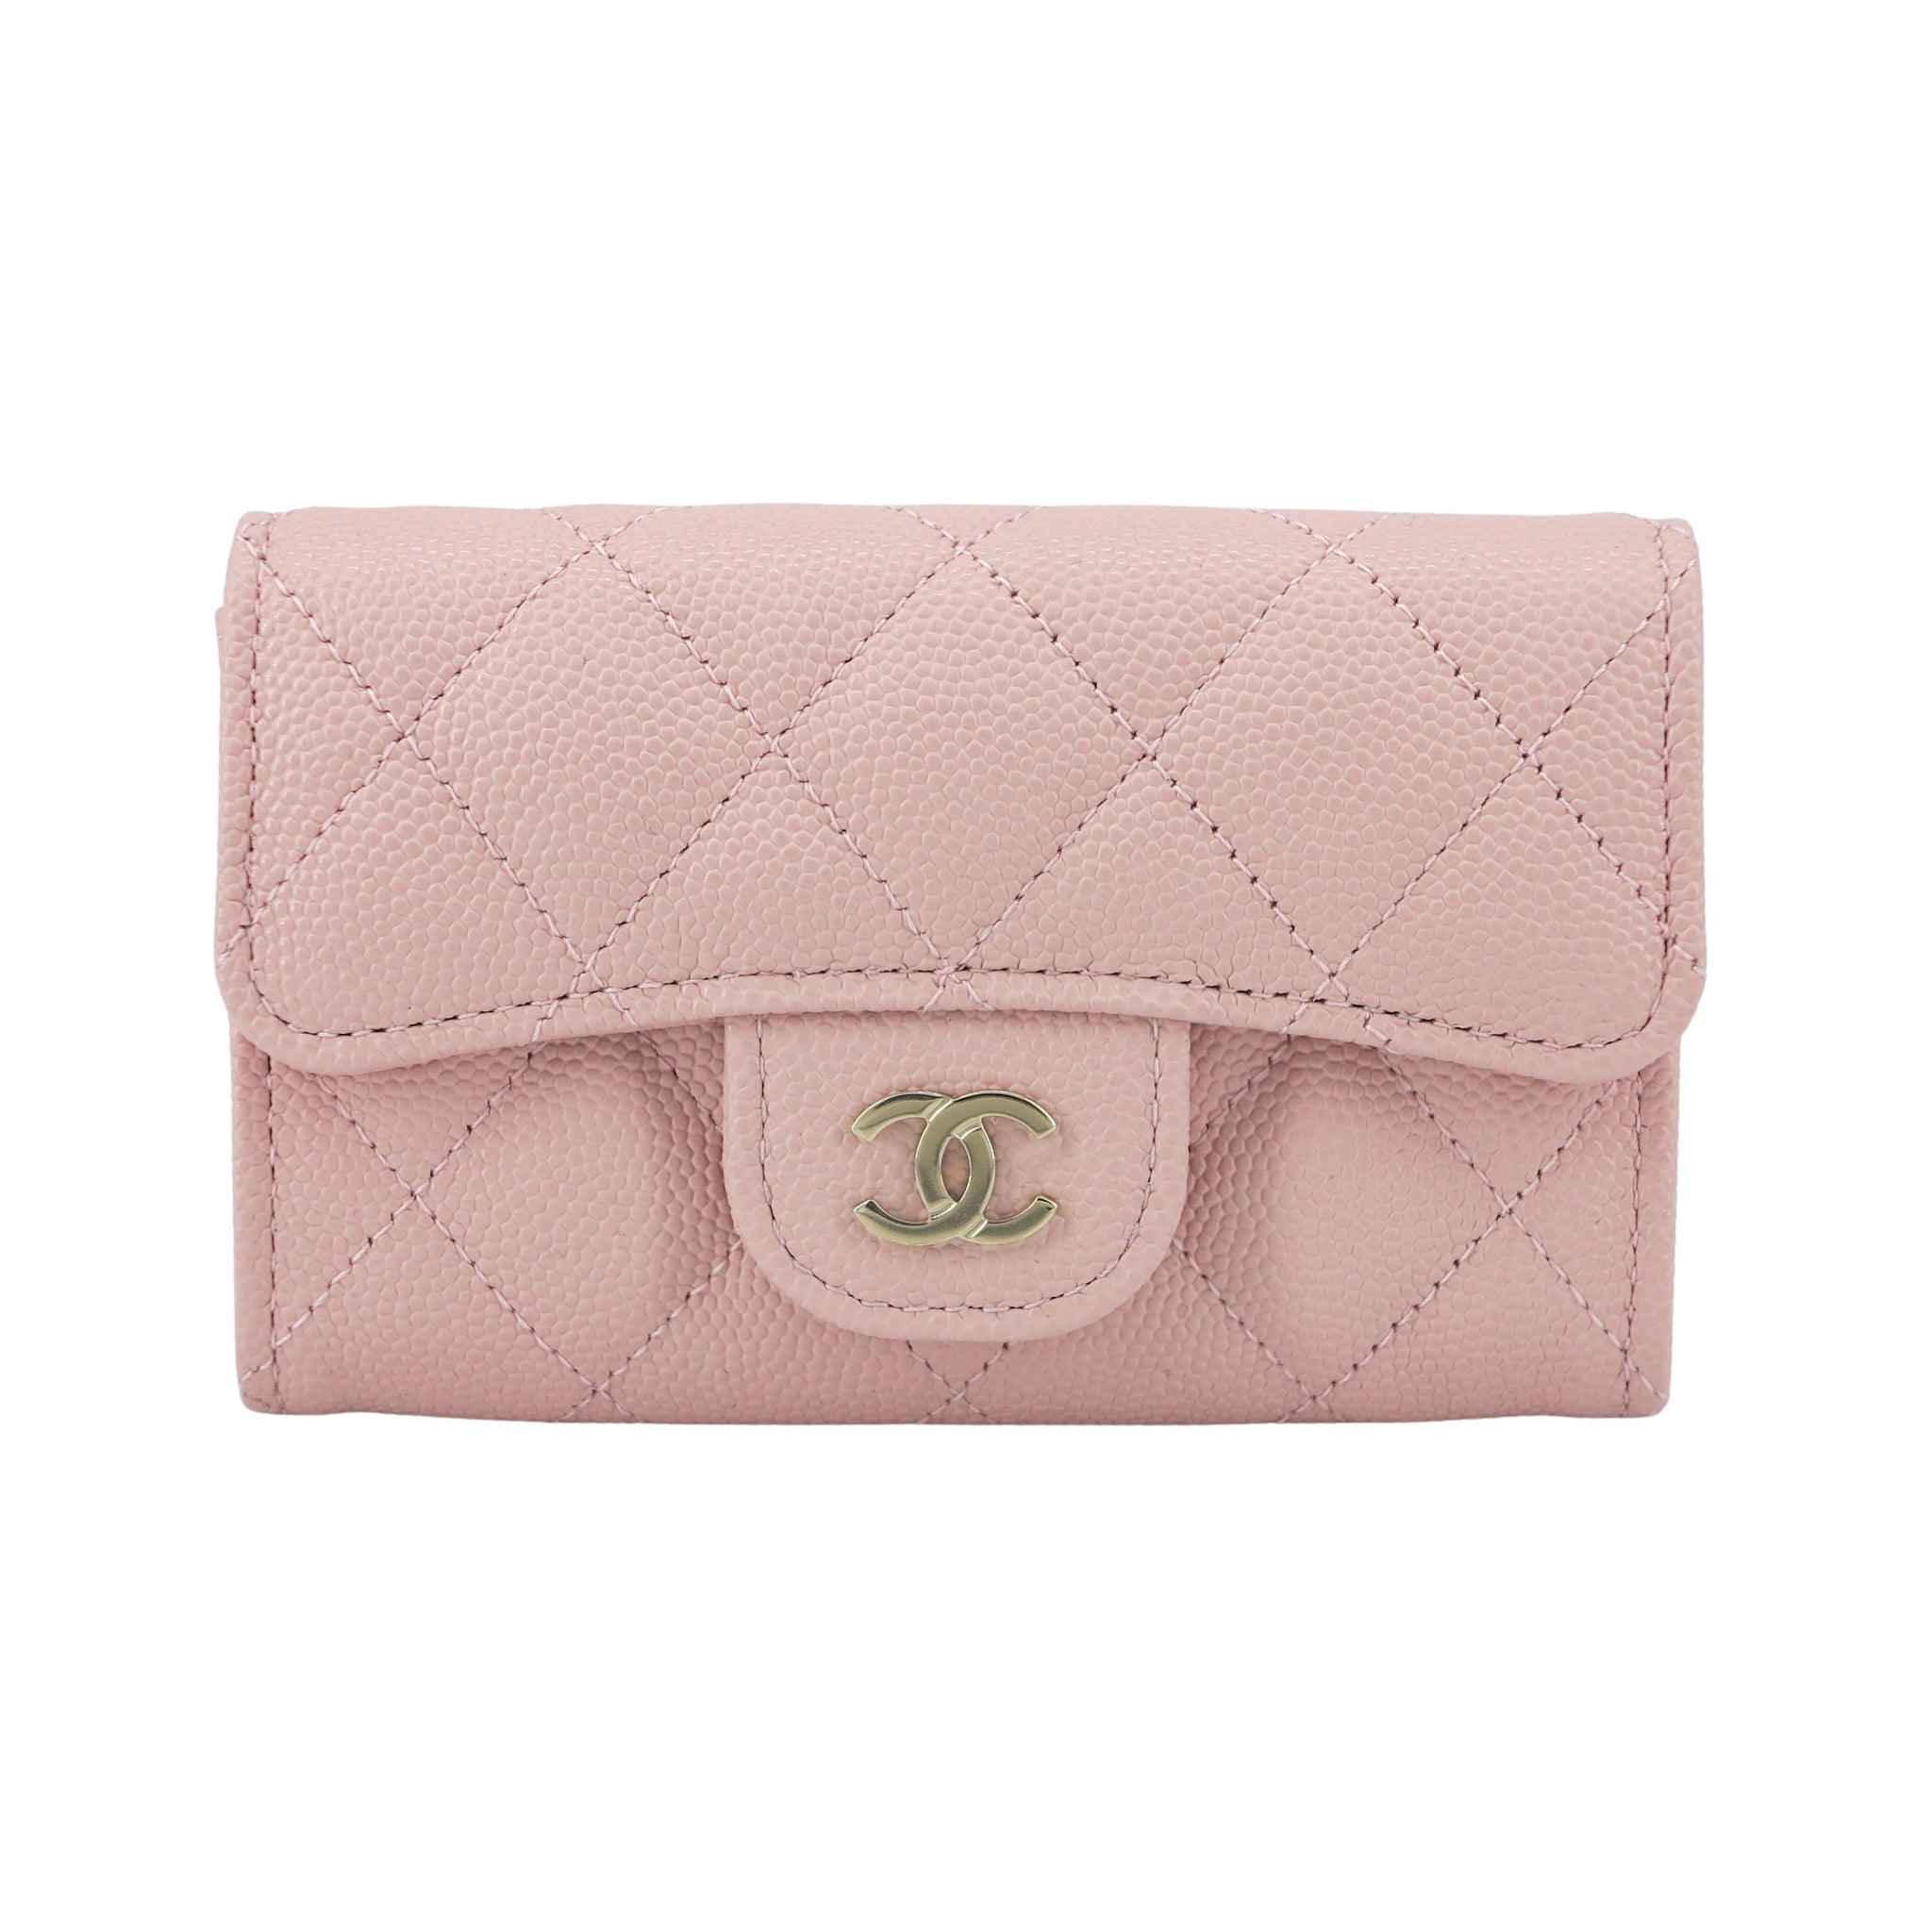 SOLD Brand New Chanel Flap Card Holder Pink SHW  Chanel flap Chanel  bag Chanel